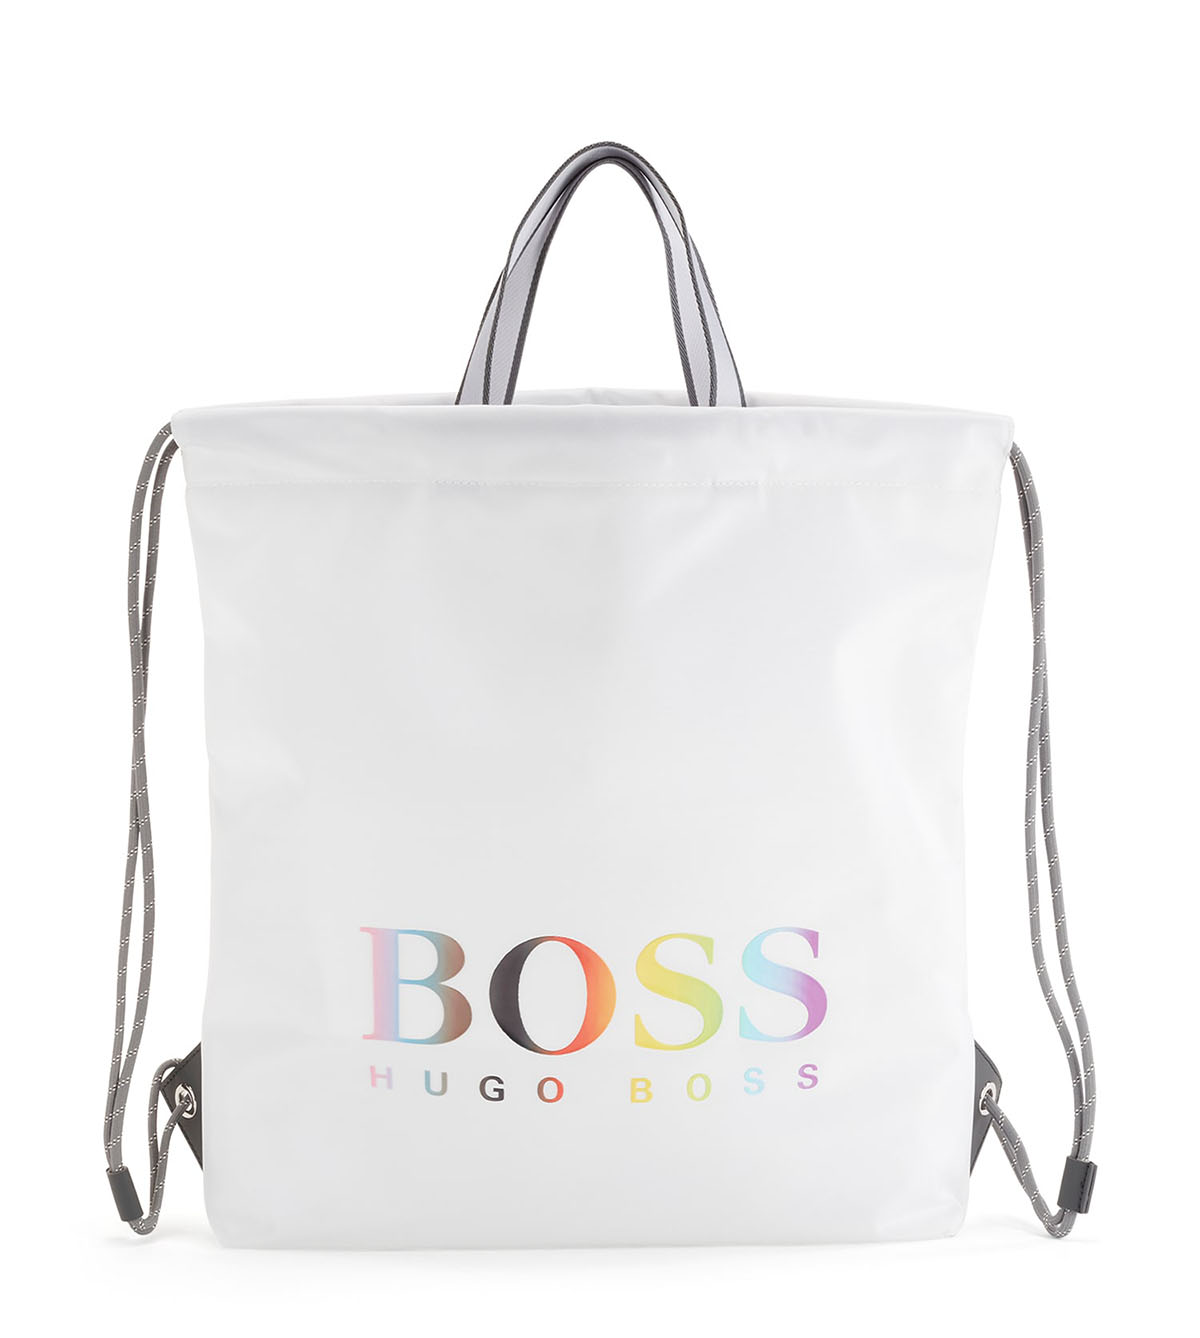 BOSS celebrates Pride Month 2021 with a capsule collection